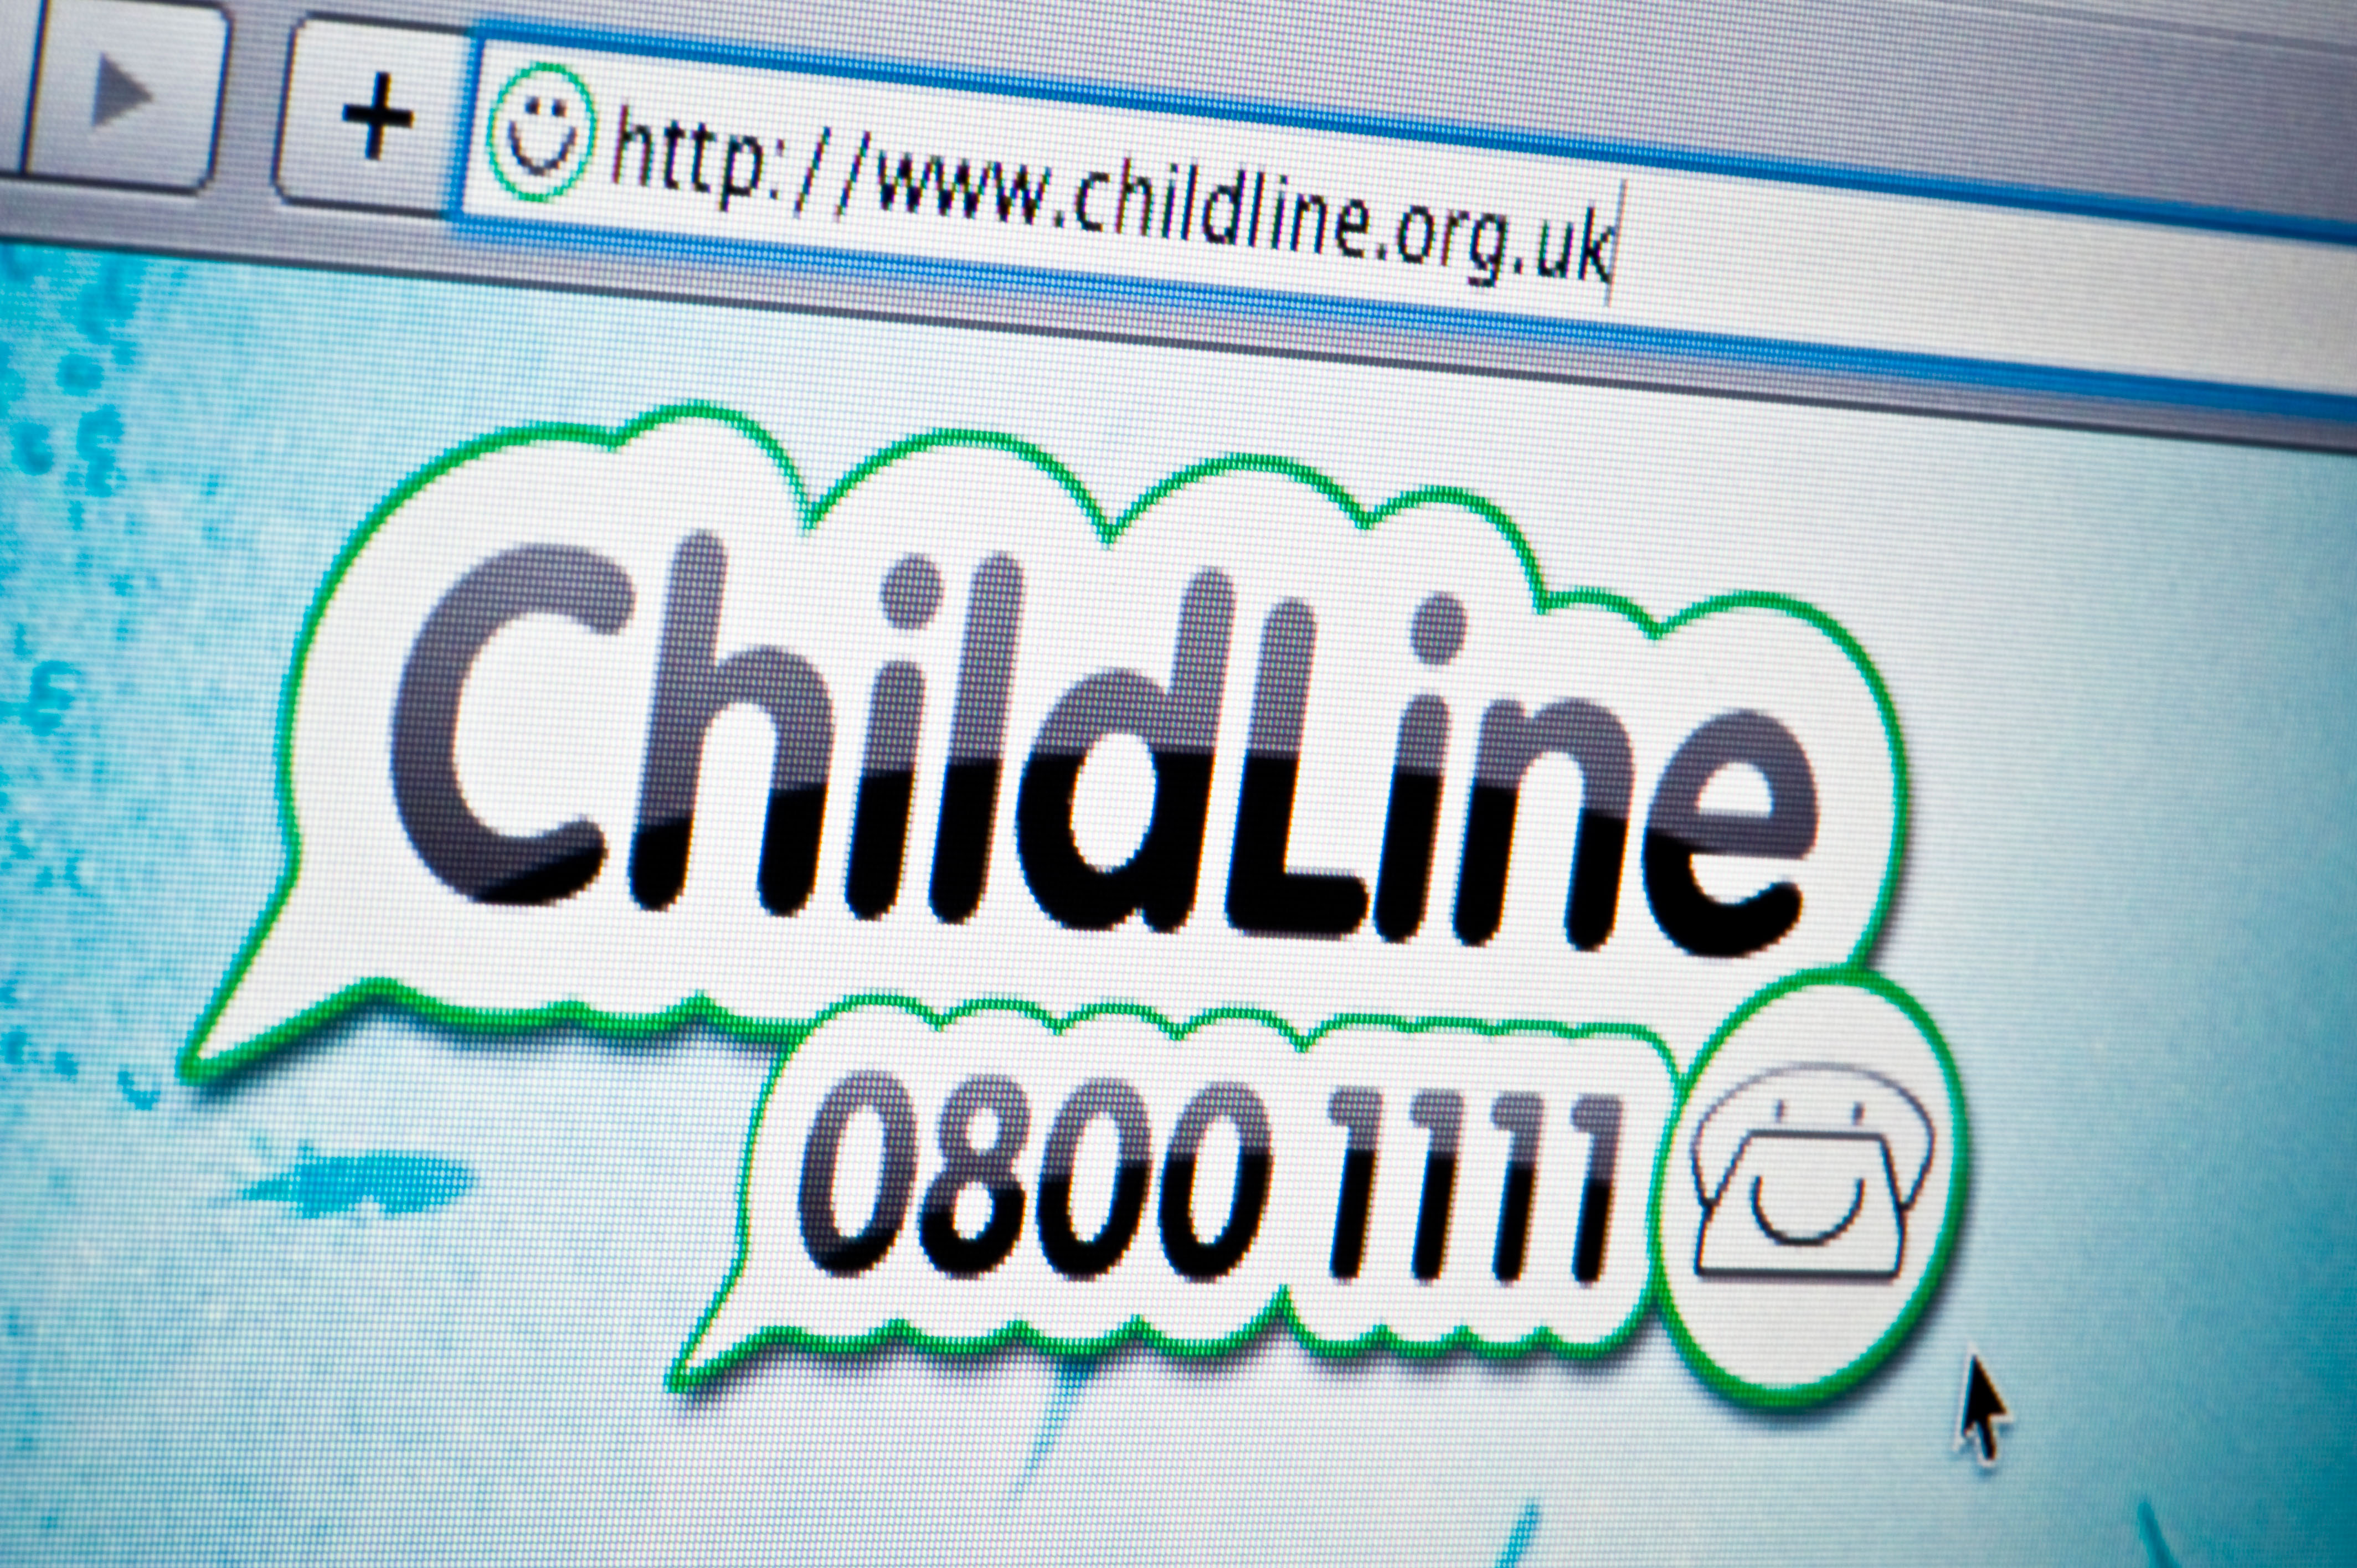 Charity Every Child Online partners with NSPCC's Childline to empower  vulnerable children through technology - Gateway 97.8